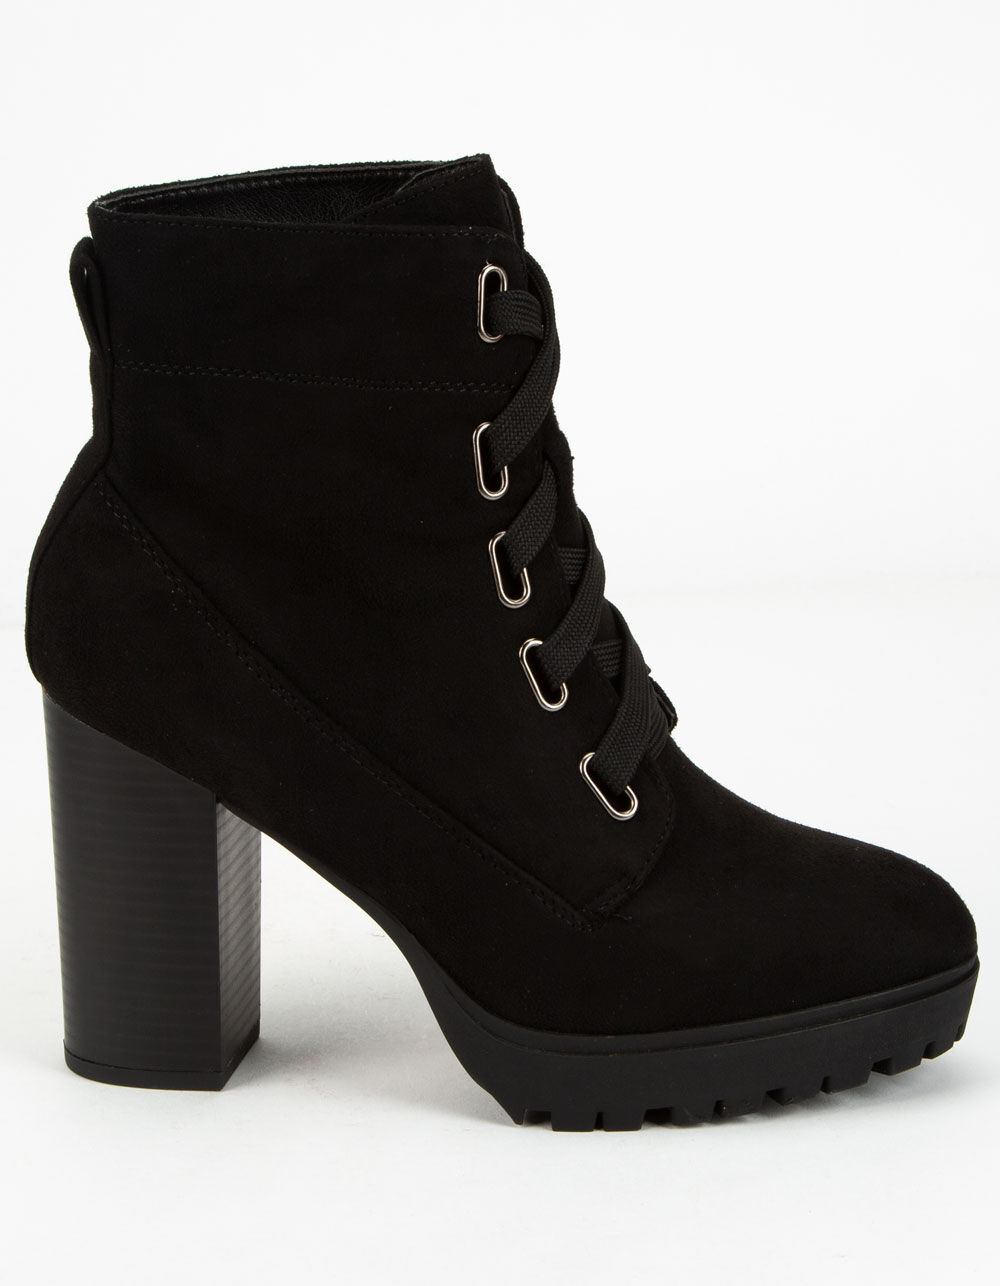 SODA Lug Sole Lace Up Eyelet Black Womens Booties - BLACK | Tillys